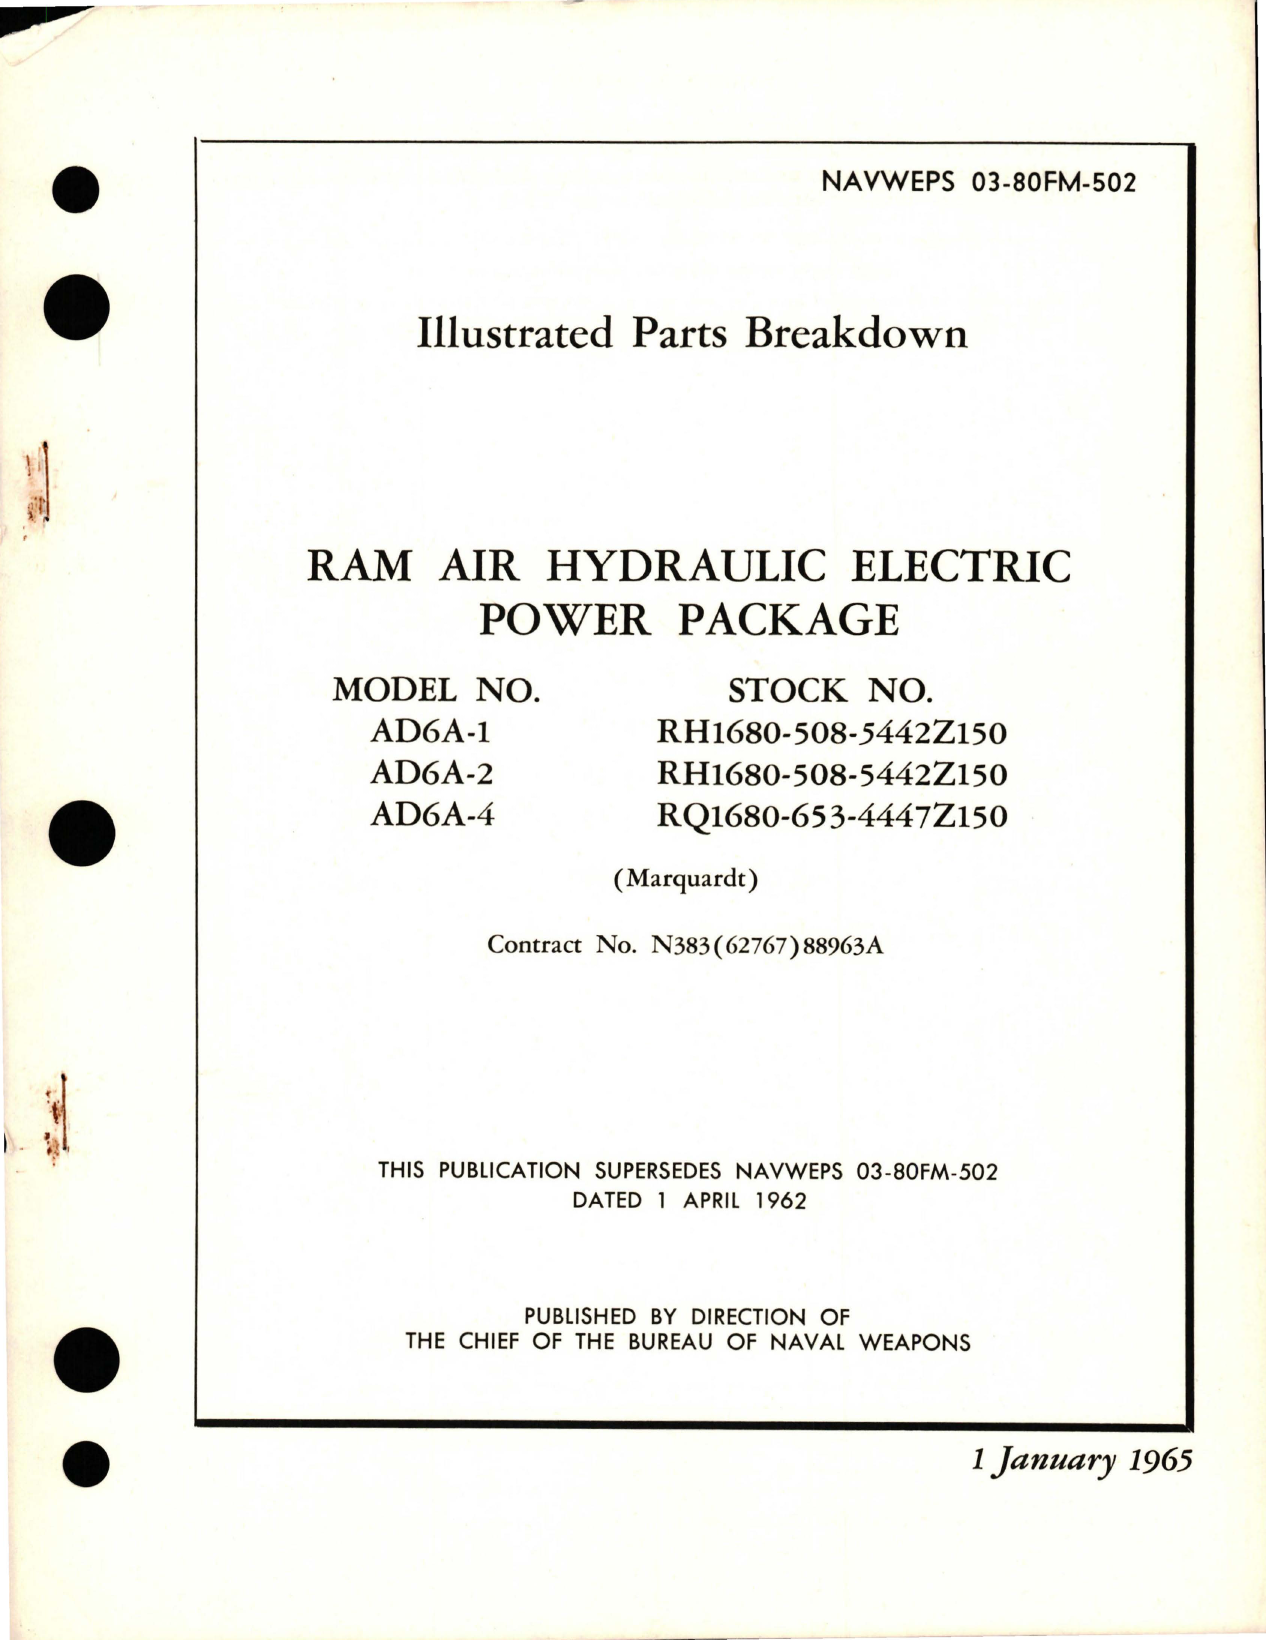 Sample page 1 from AirCorps Library document: Illustrated Parts Breakdown for Ram Air Hydraulic Electric Power Package - Models AD6A-1, AD6A-2, and AD6A-4